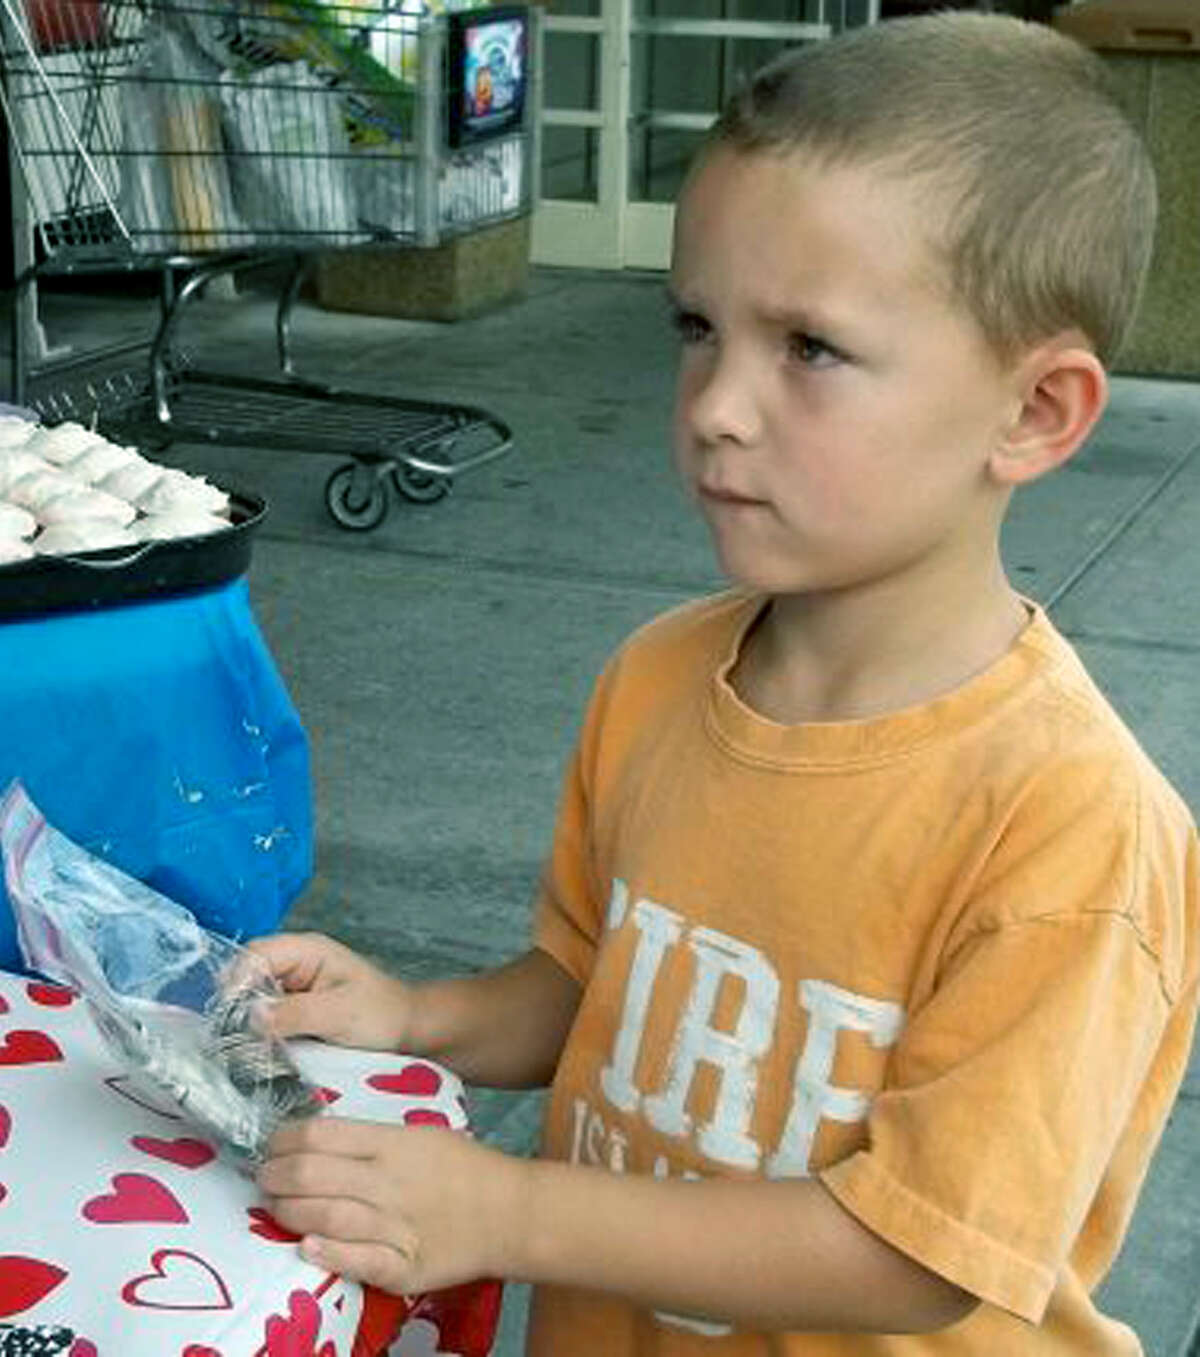 Bill Kaschube, 5, of New Milford is ready to donate $24 he took from his piggy bank to the Wilkinson/Fratino bake sale fundraiser. Sept. 12, 2012